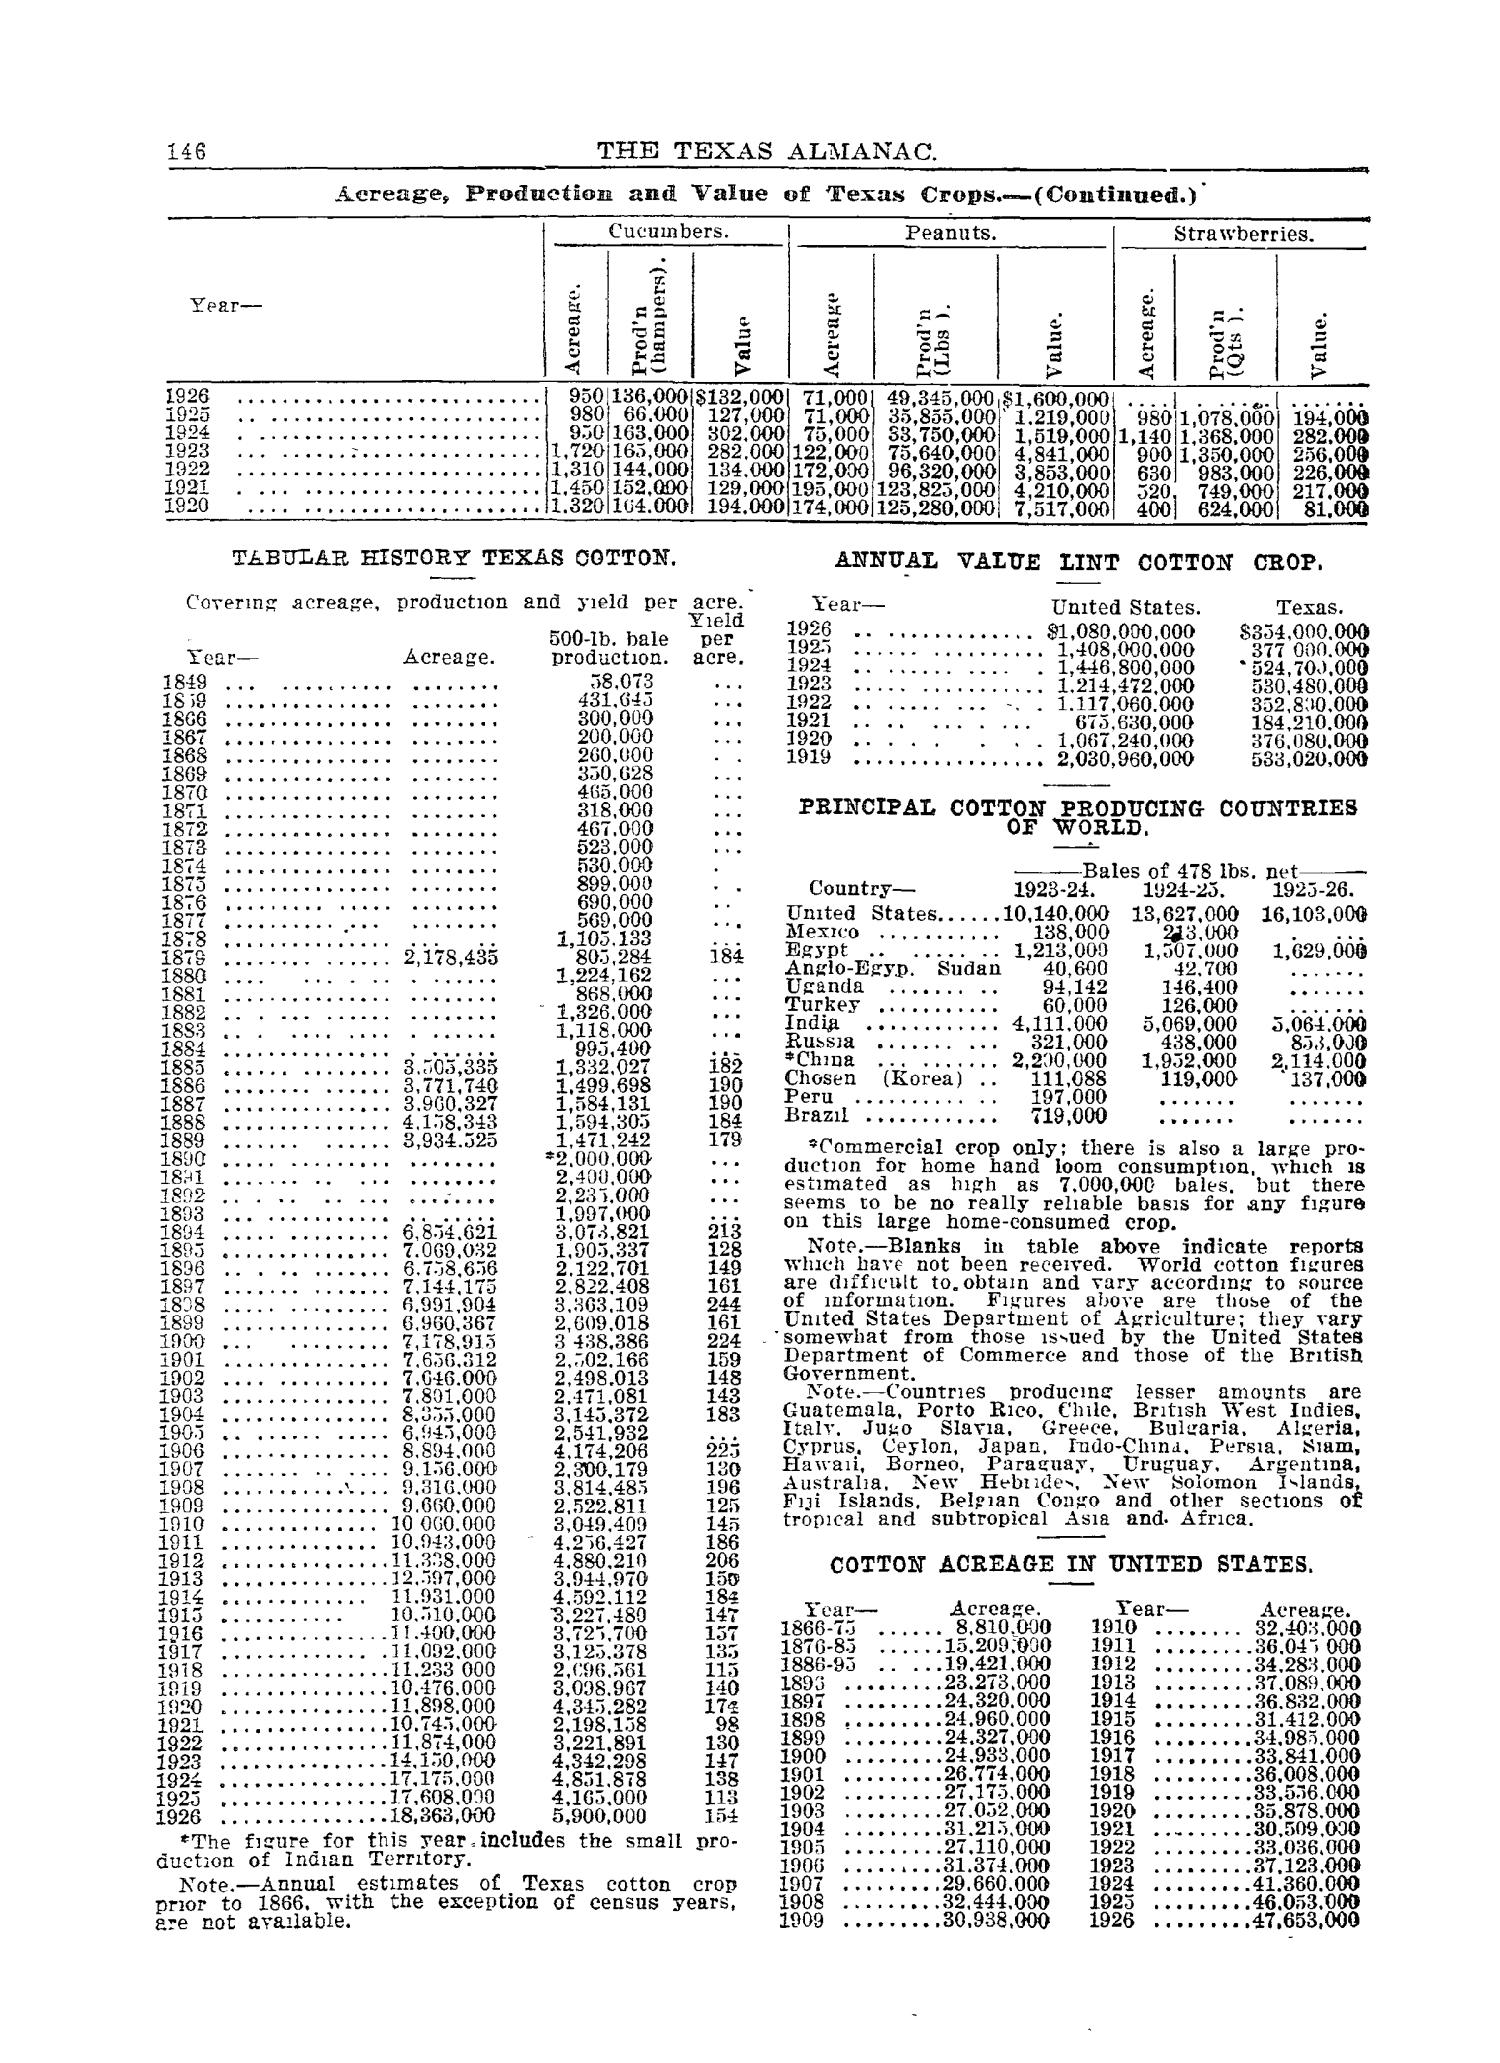 1927 The Texas Almanac and State Industrial Guide
                                                
                                                    146
                                                